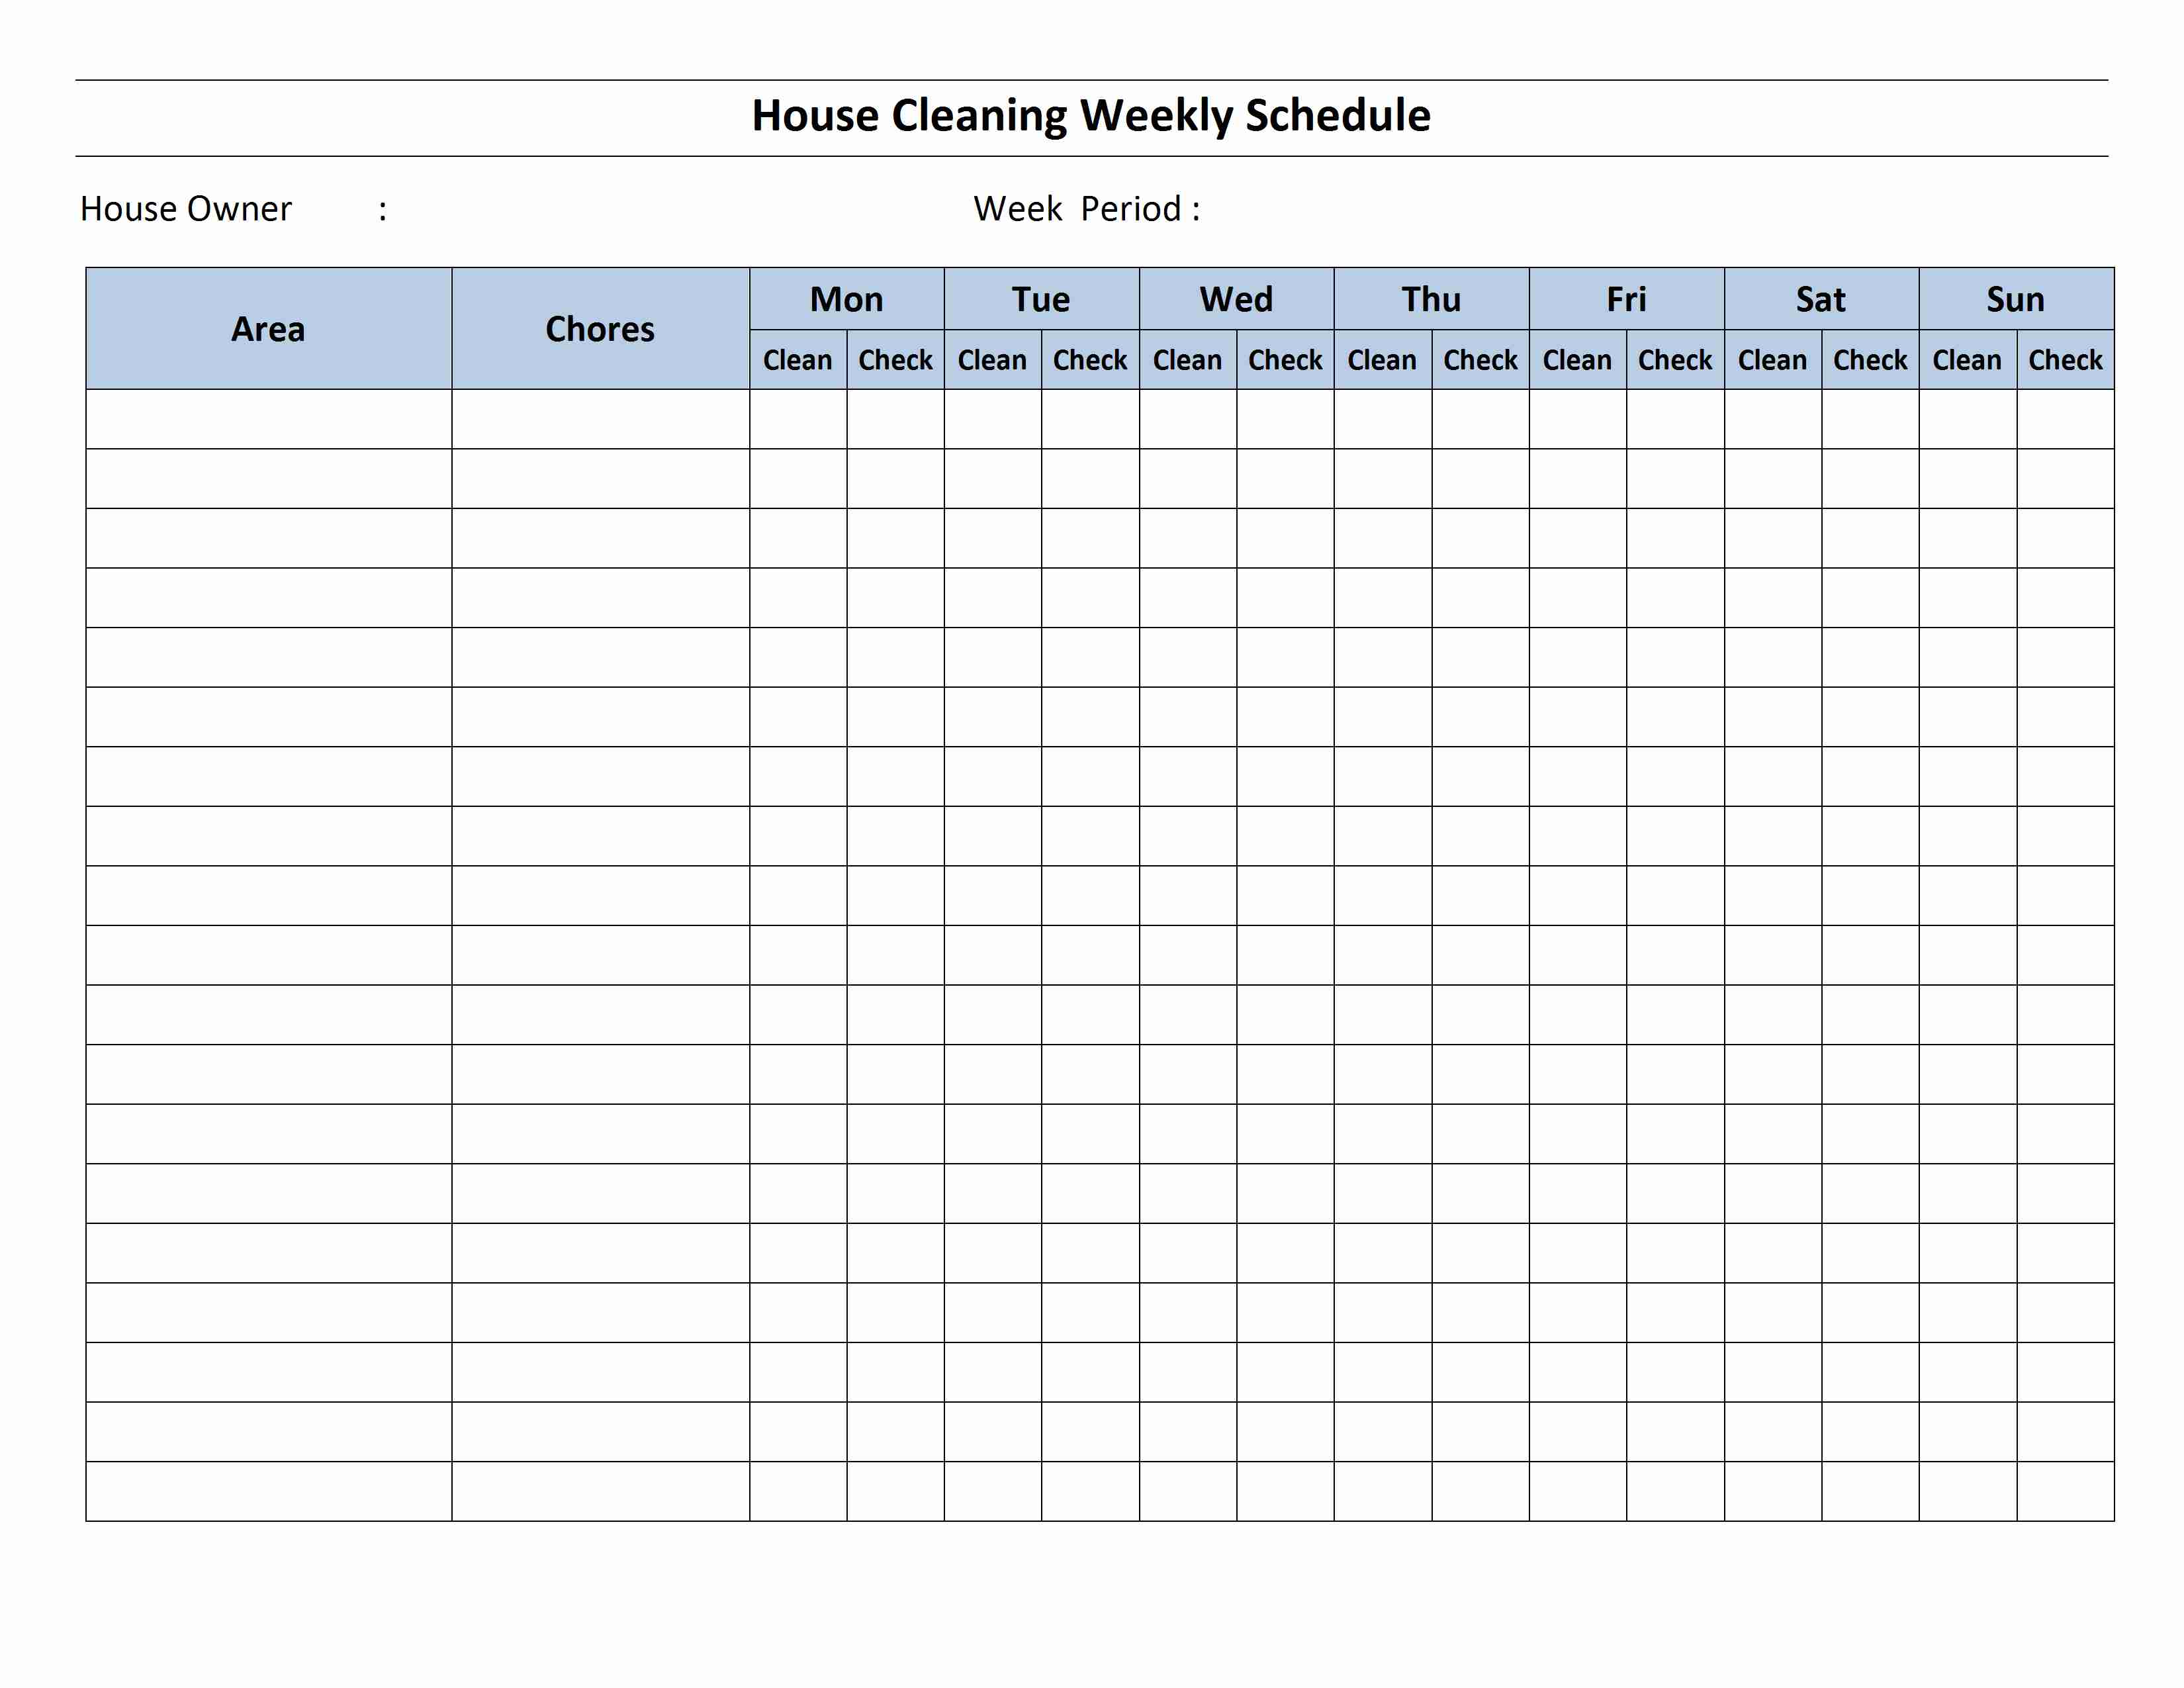 Cleaning Schedule Template | aplg planetariums.org